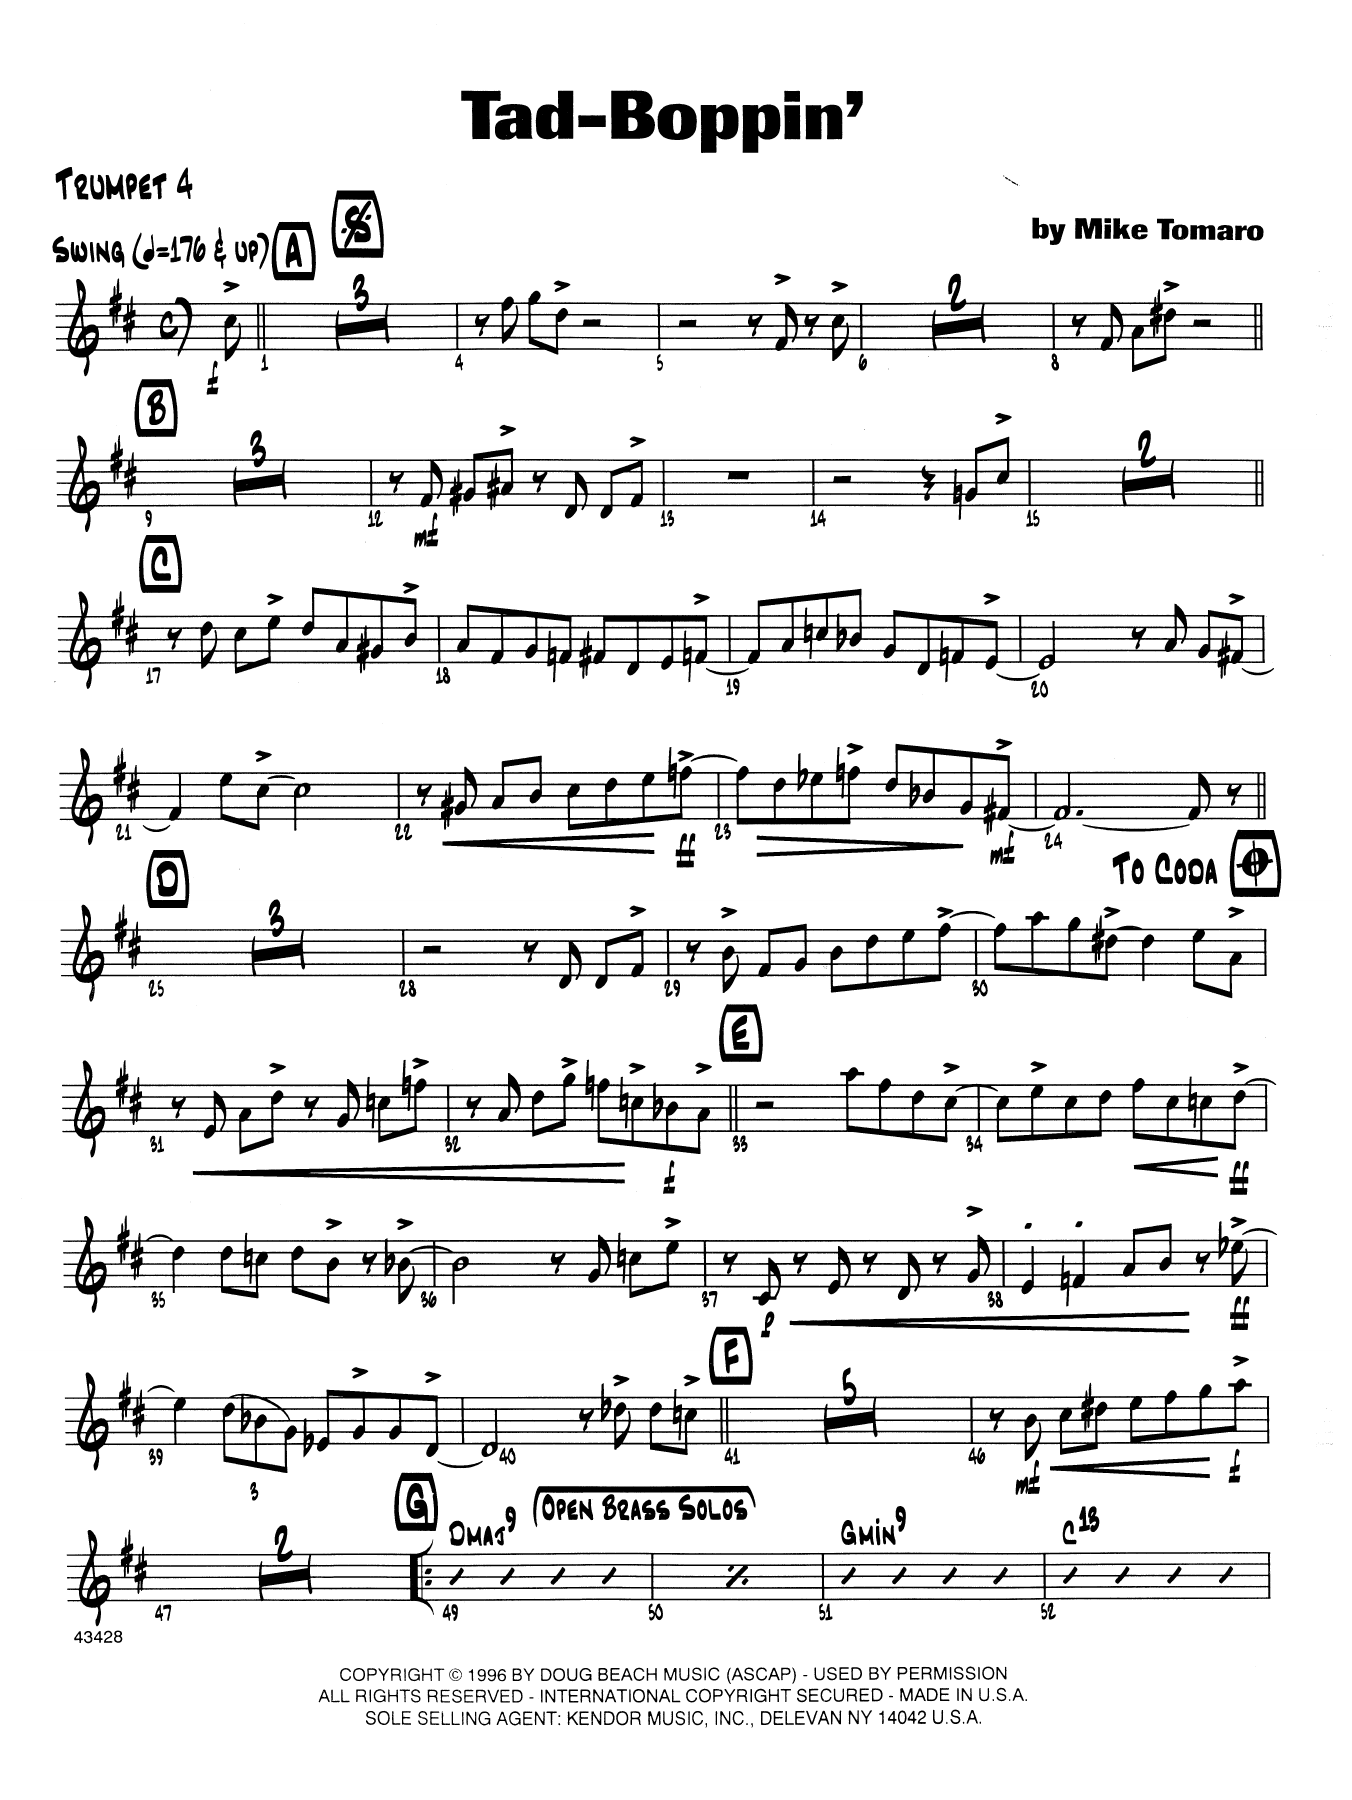 Download Mike Tomaro Tad-Boppin - 4th Bb Trumpet Sheet Music